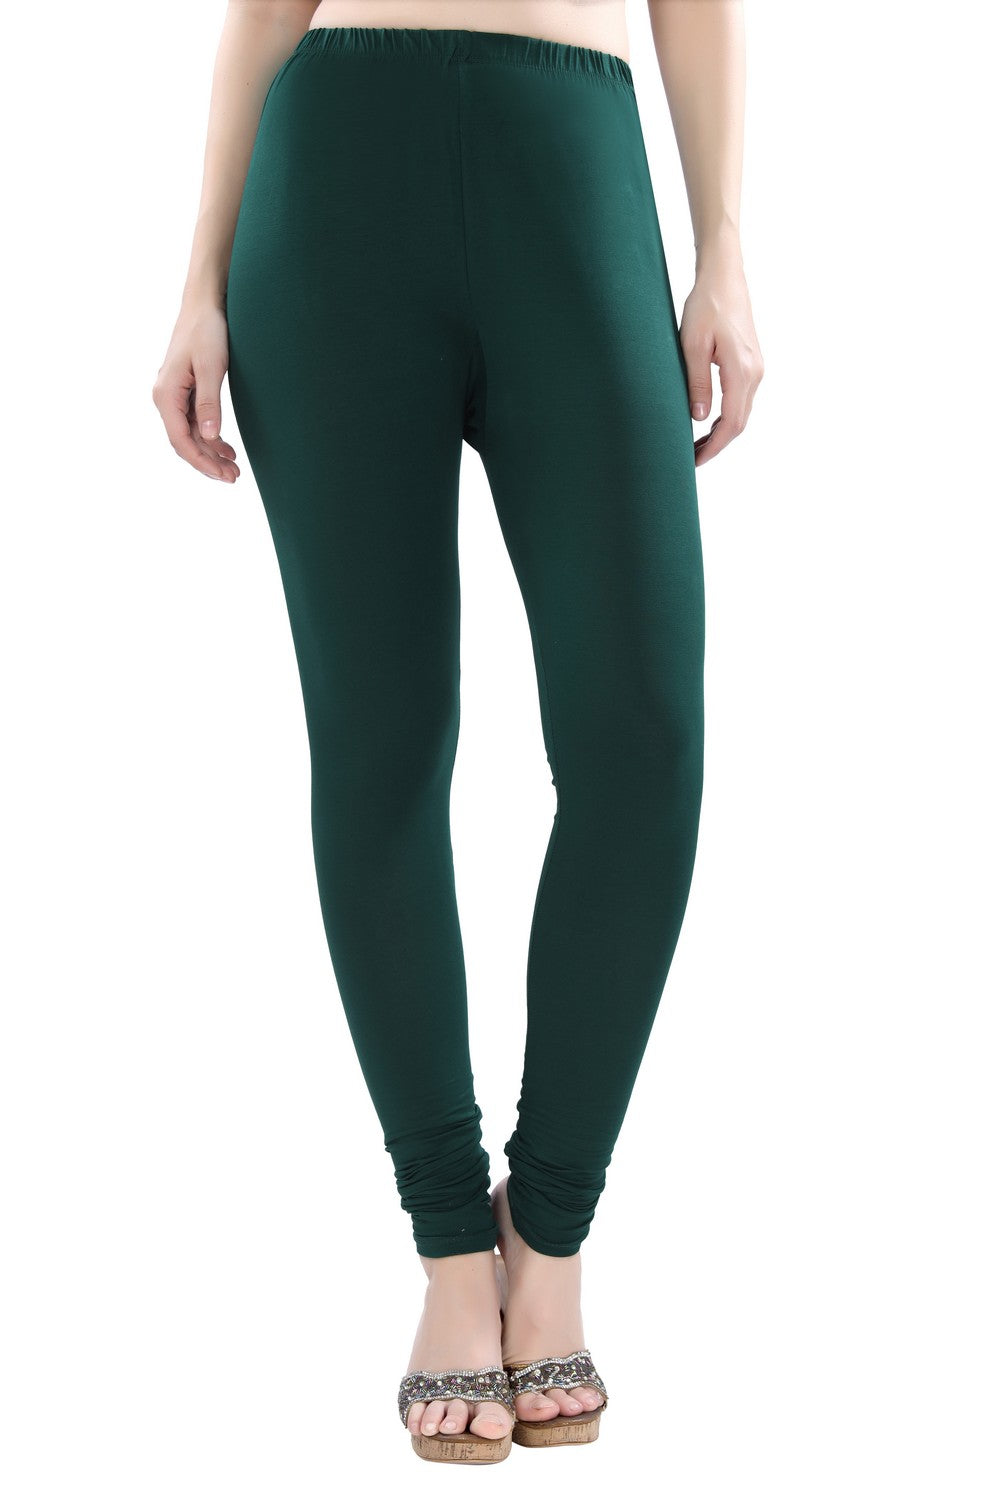 Mid Waist Cotton Spandex Leggings, 4-Way Stretchable, Casual Wear, Slim Fit  at Rs 140 in Bengaluru